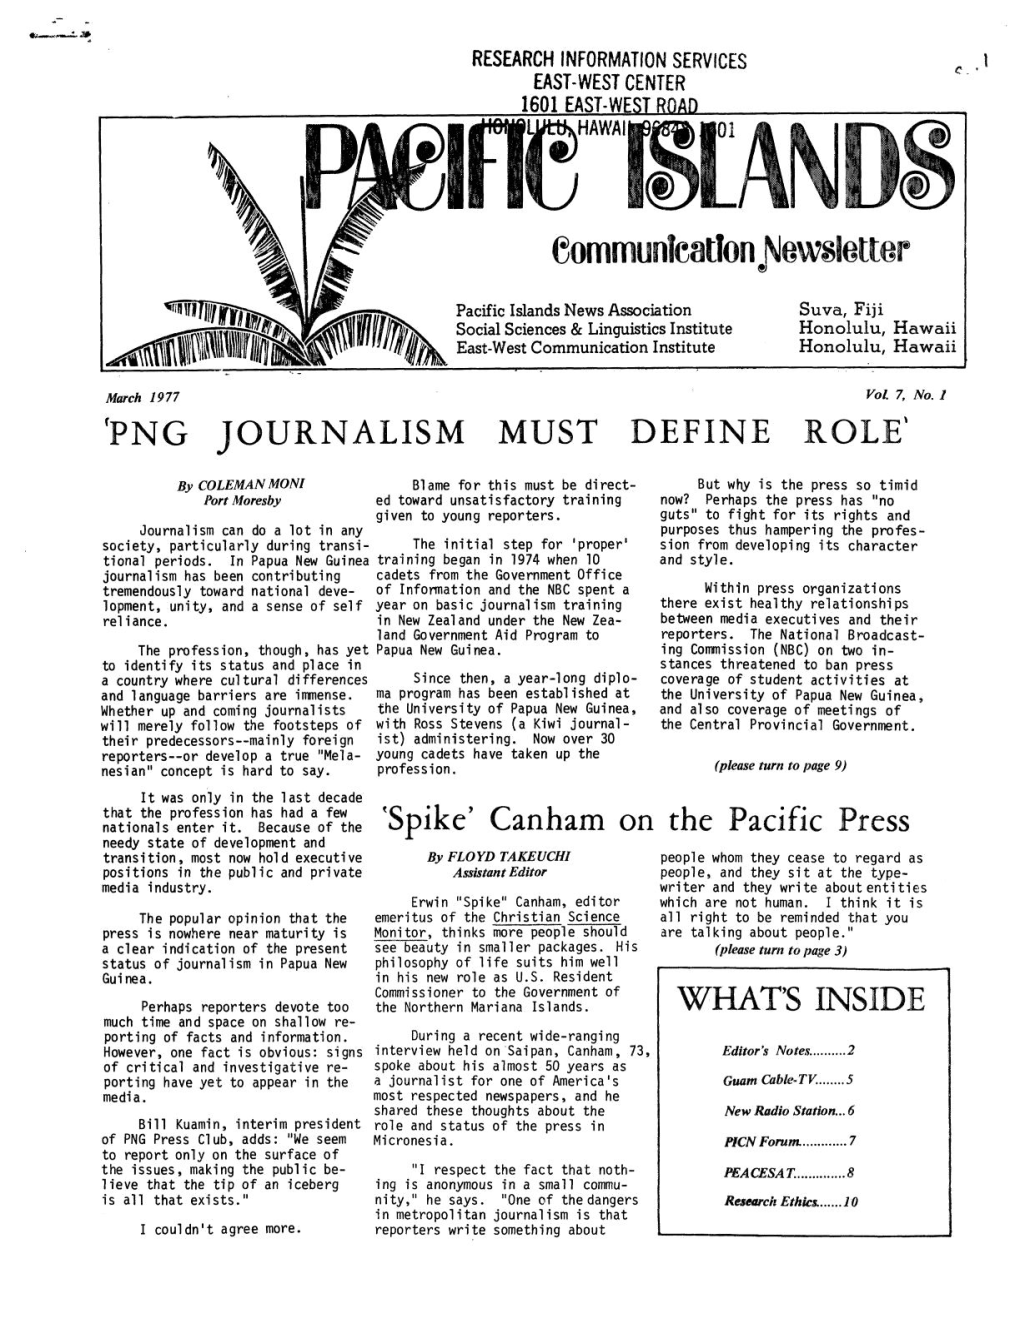 Pacific Islands Communication Newsletter, March 1977, Vol. 7, No. 1